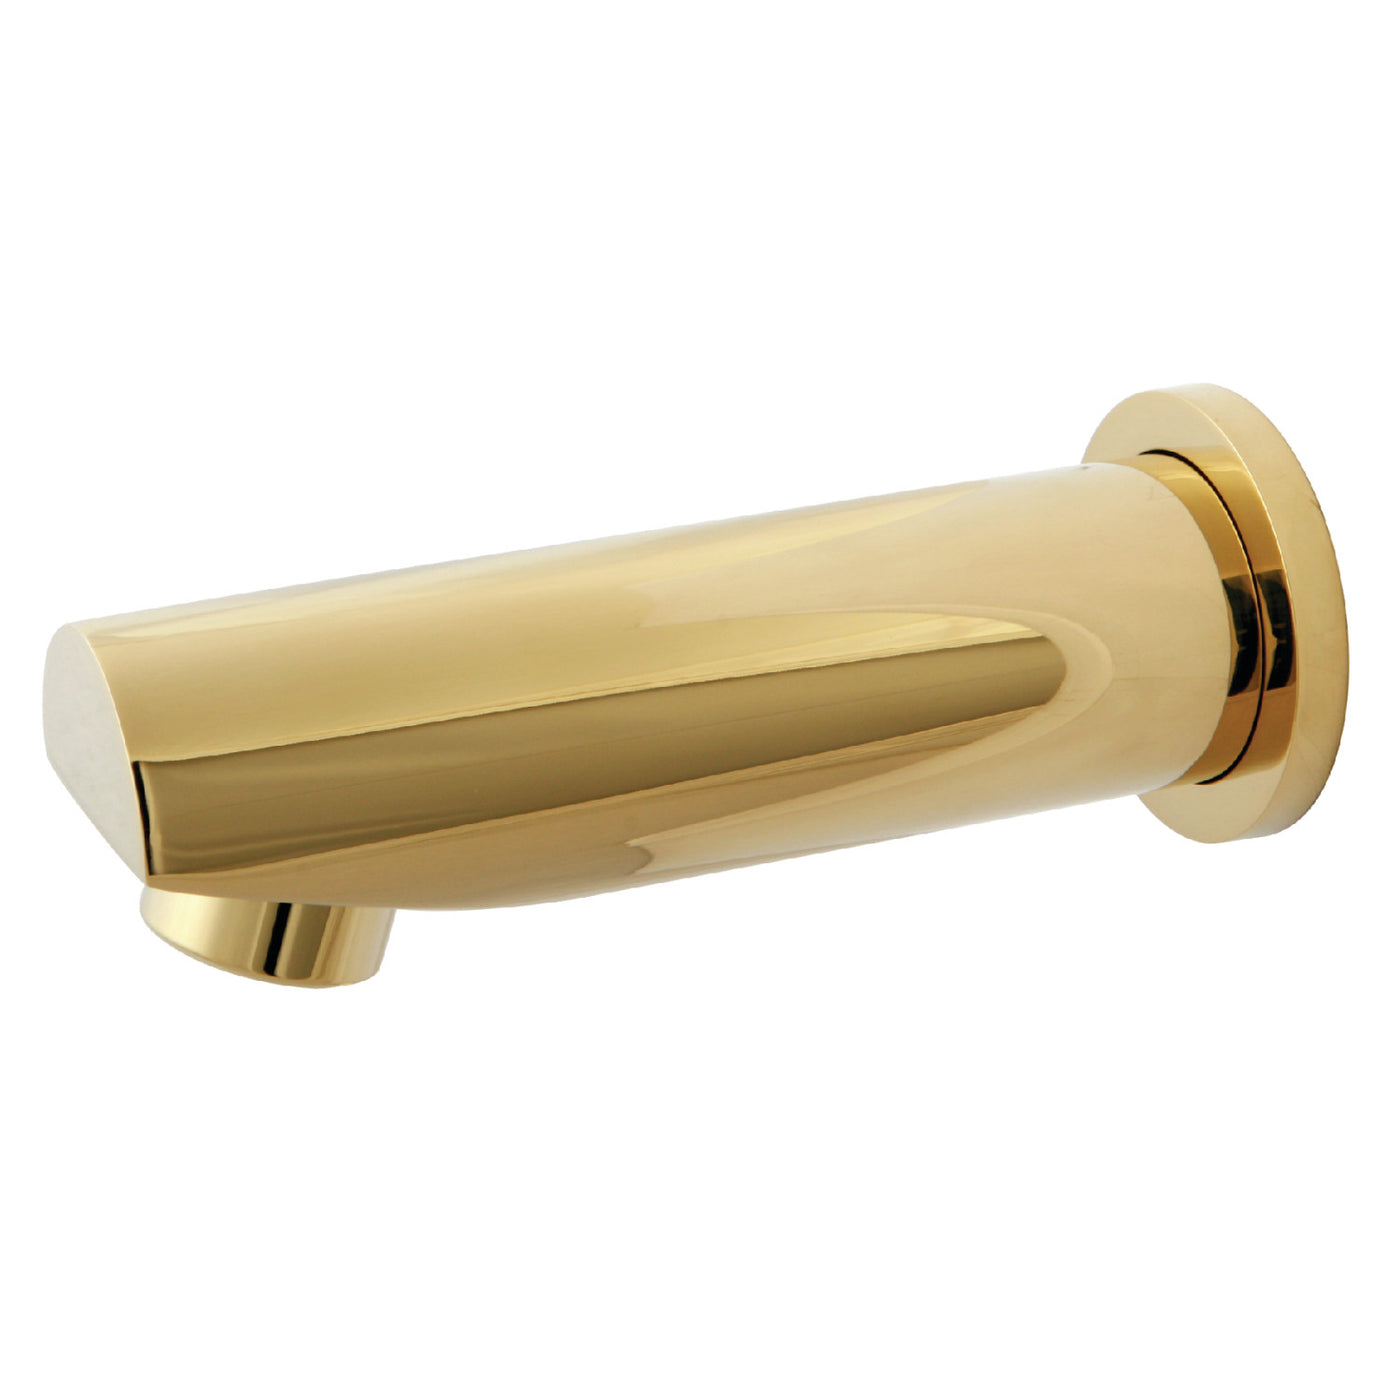 Elements of Design DK8187A2 Tub Faucet Spout with Flange, Polished Brass